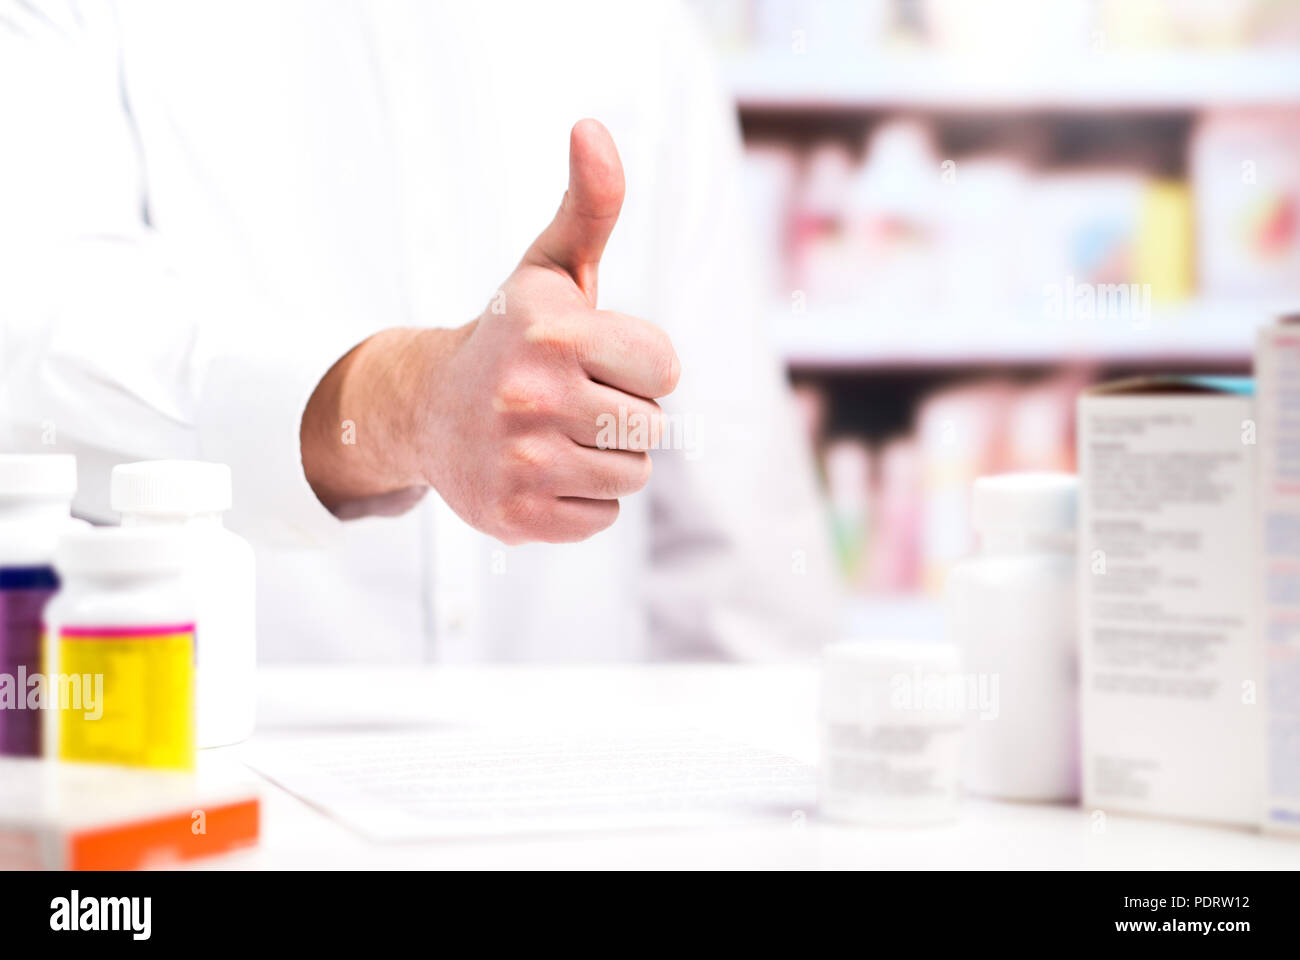 Happy pharmacist showing thumbs up at pharmacy counter full of medicine. Drugstore shelves in the background. Positive and cheerful druggist. Stock Photo